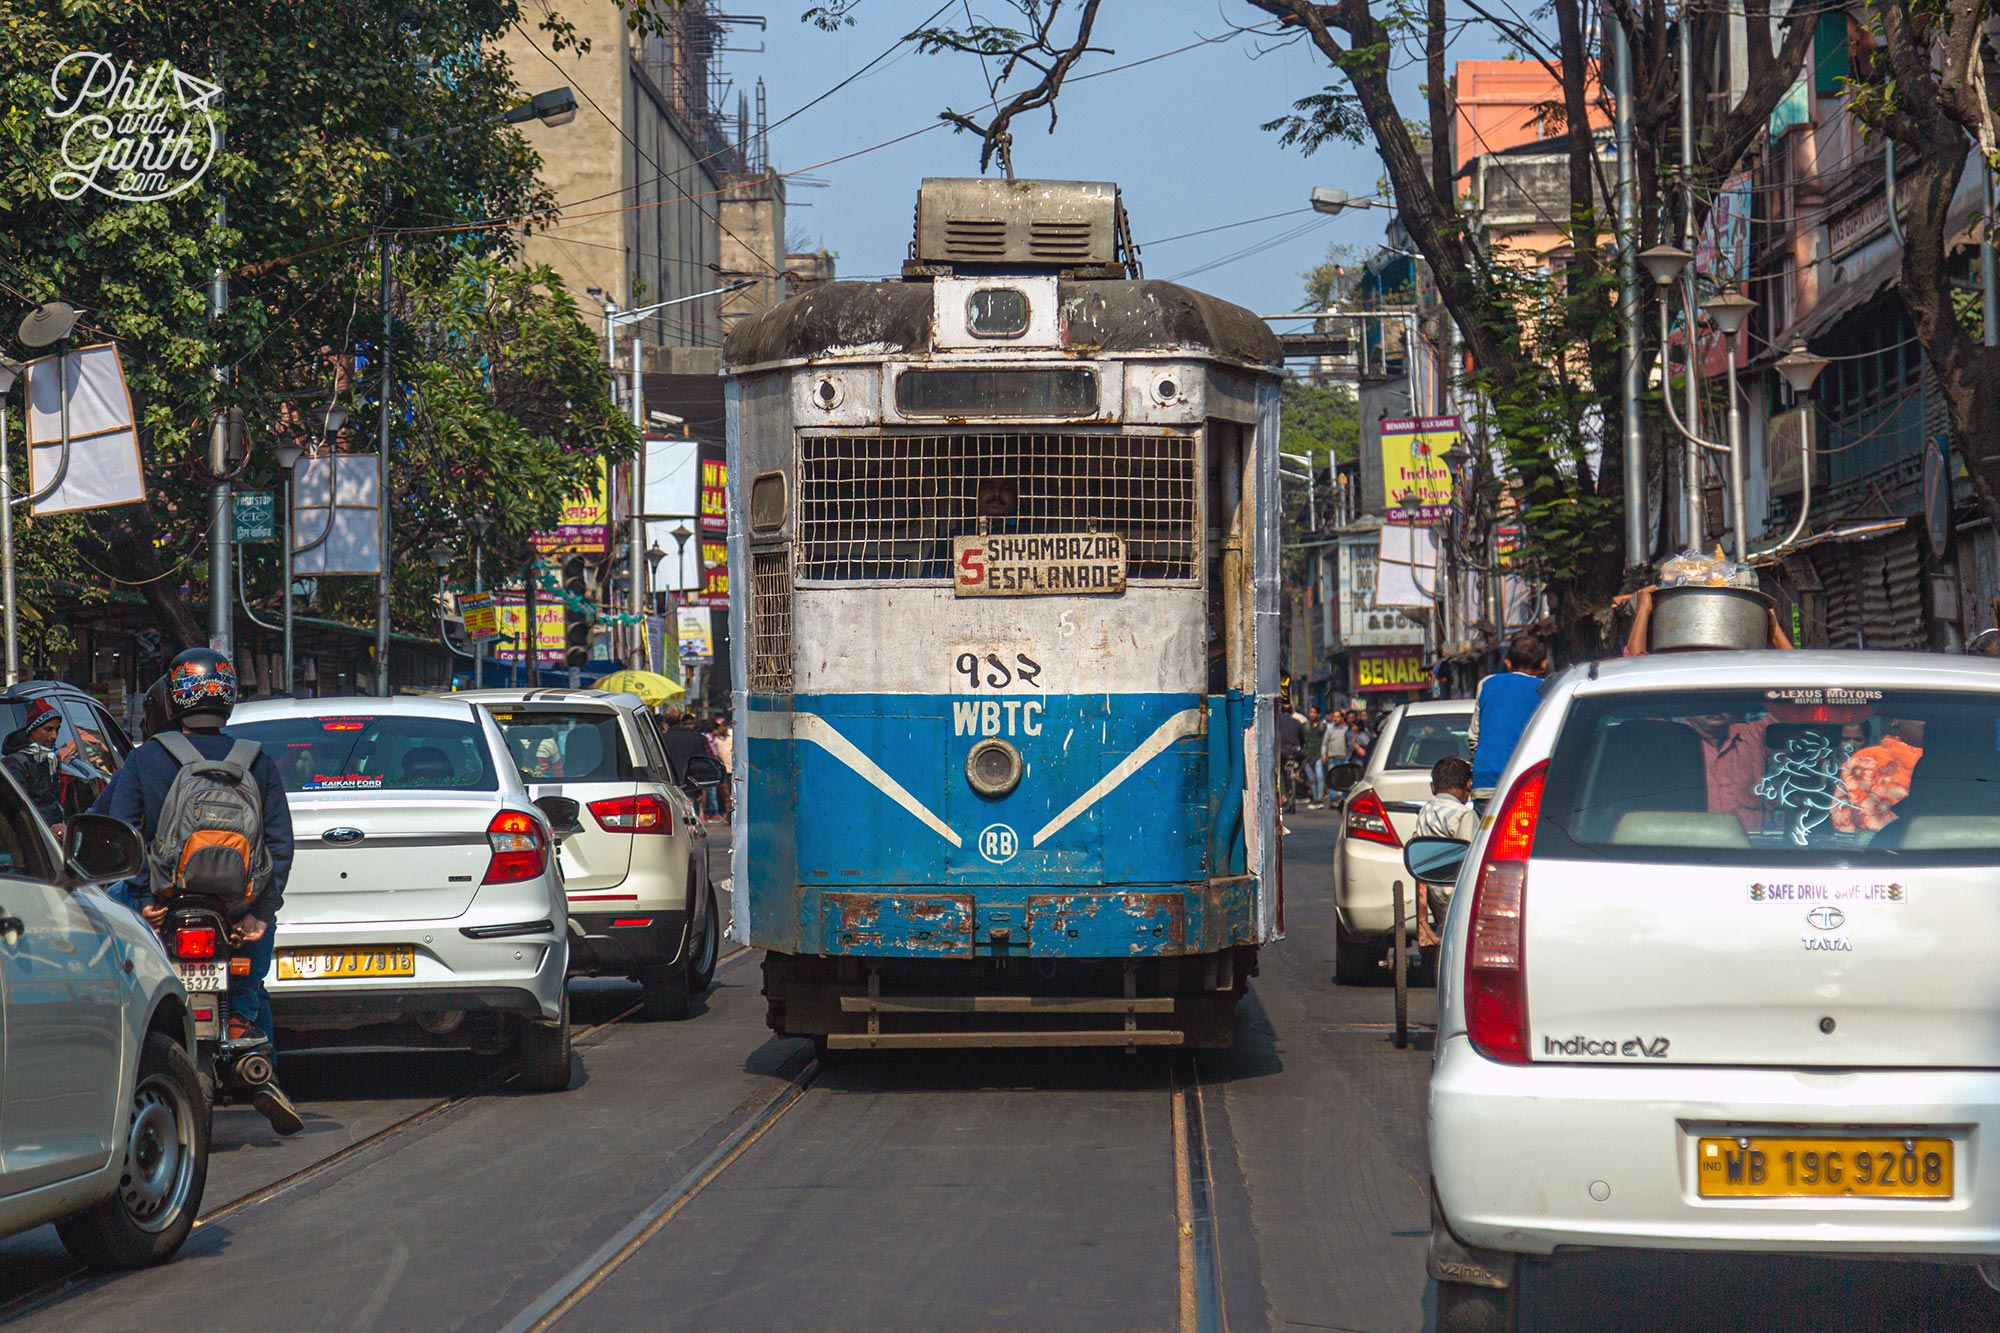 Kolkata has the oldest operating tram system in Asia, it began service in 1902